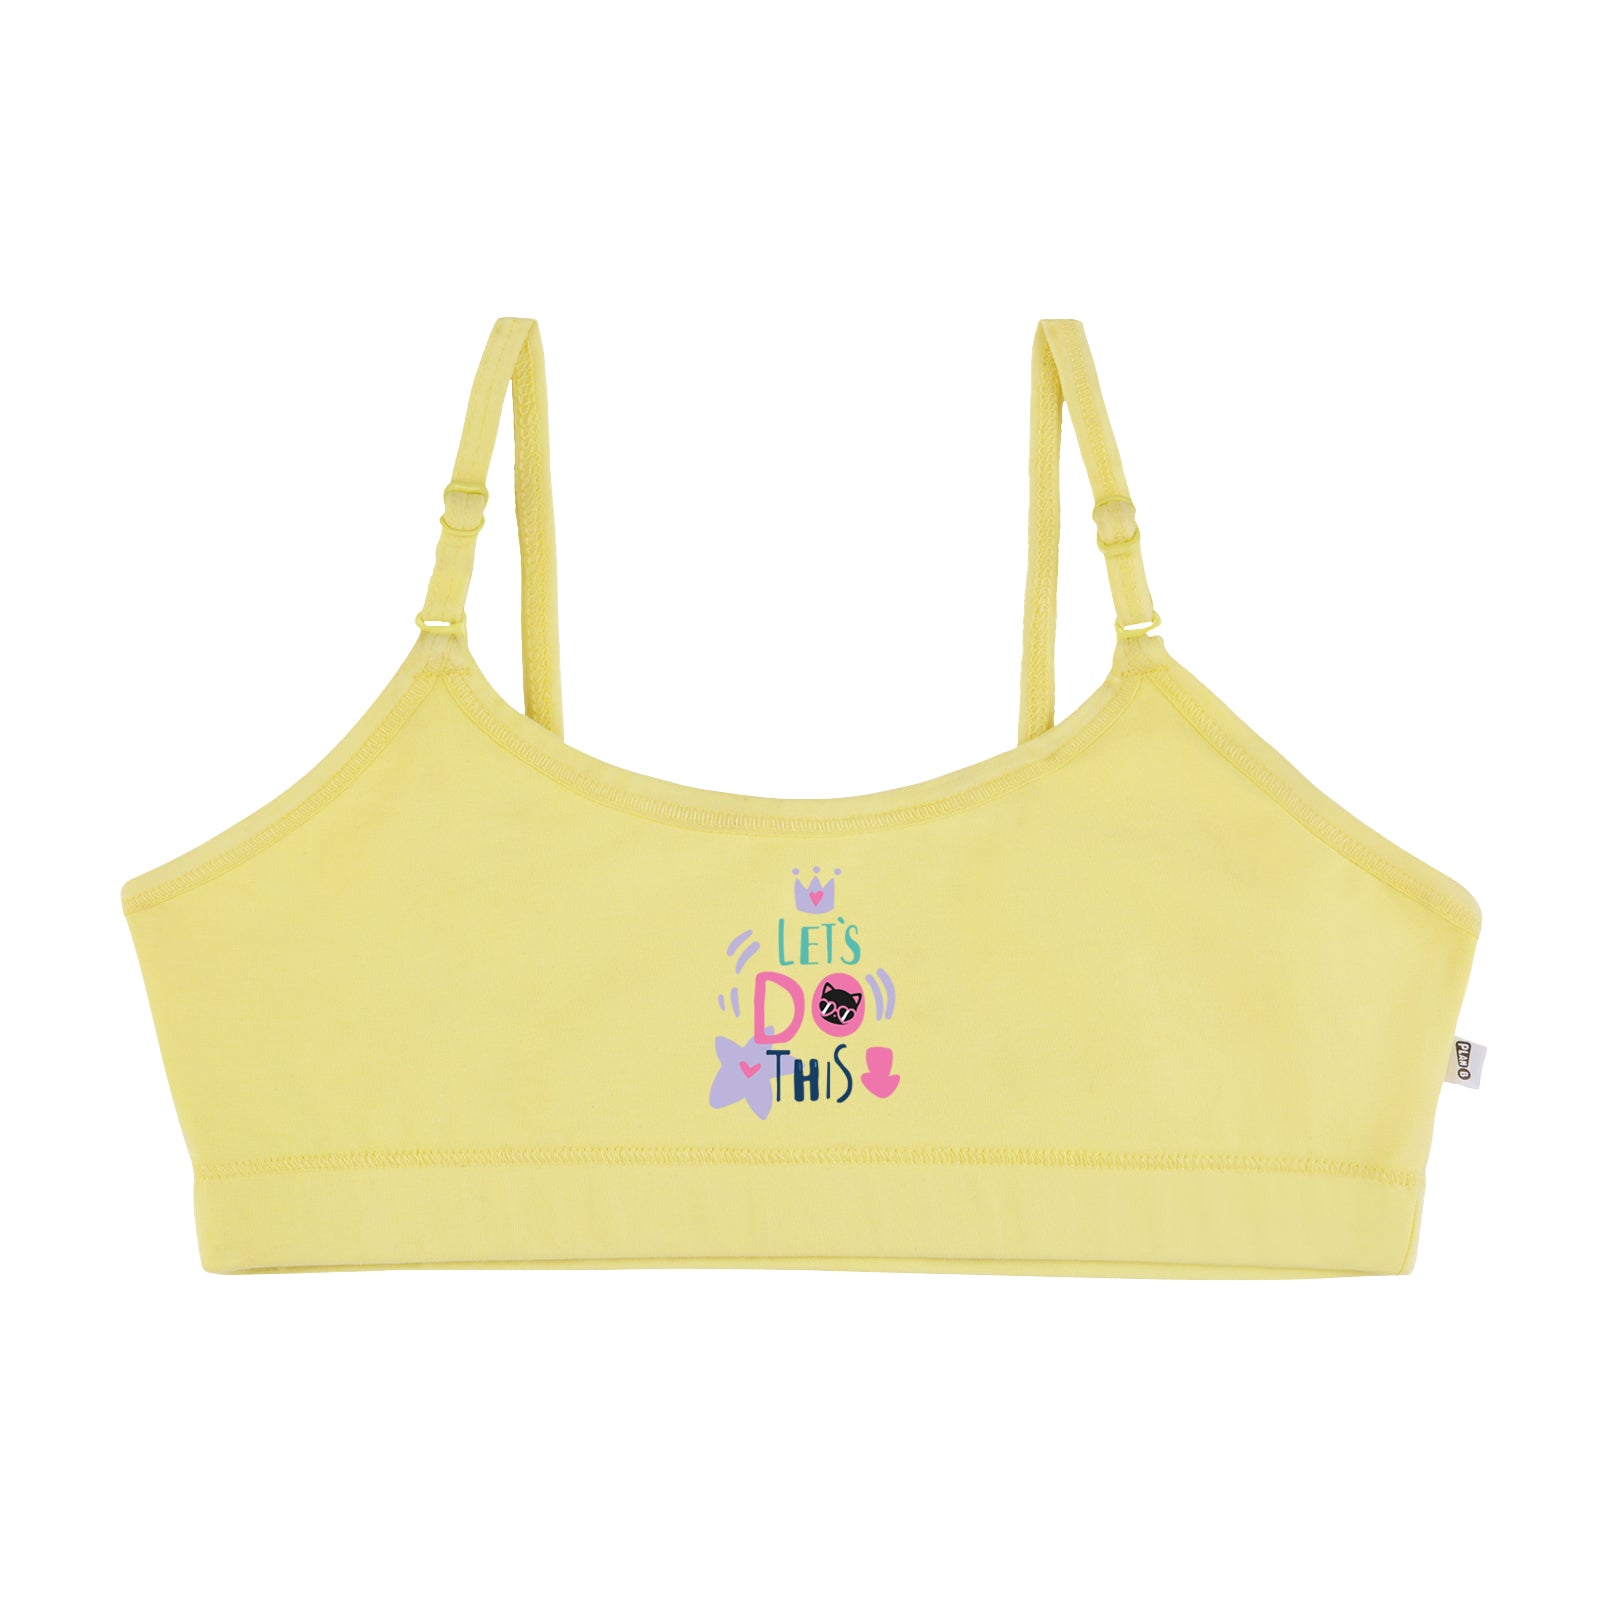  Teen Girls' Bra with Removable Cookies Spaghetti Strap Sports  Bra Training Bra Crop for Girls Toddler (Yellow, One Size) : Clothing,  Shoes & Jewelry